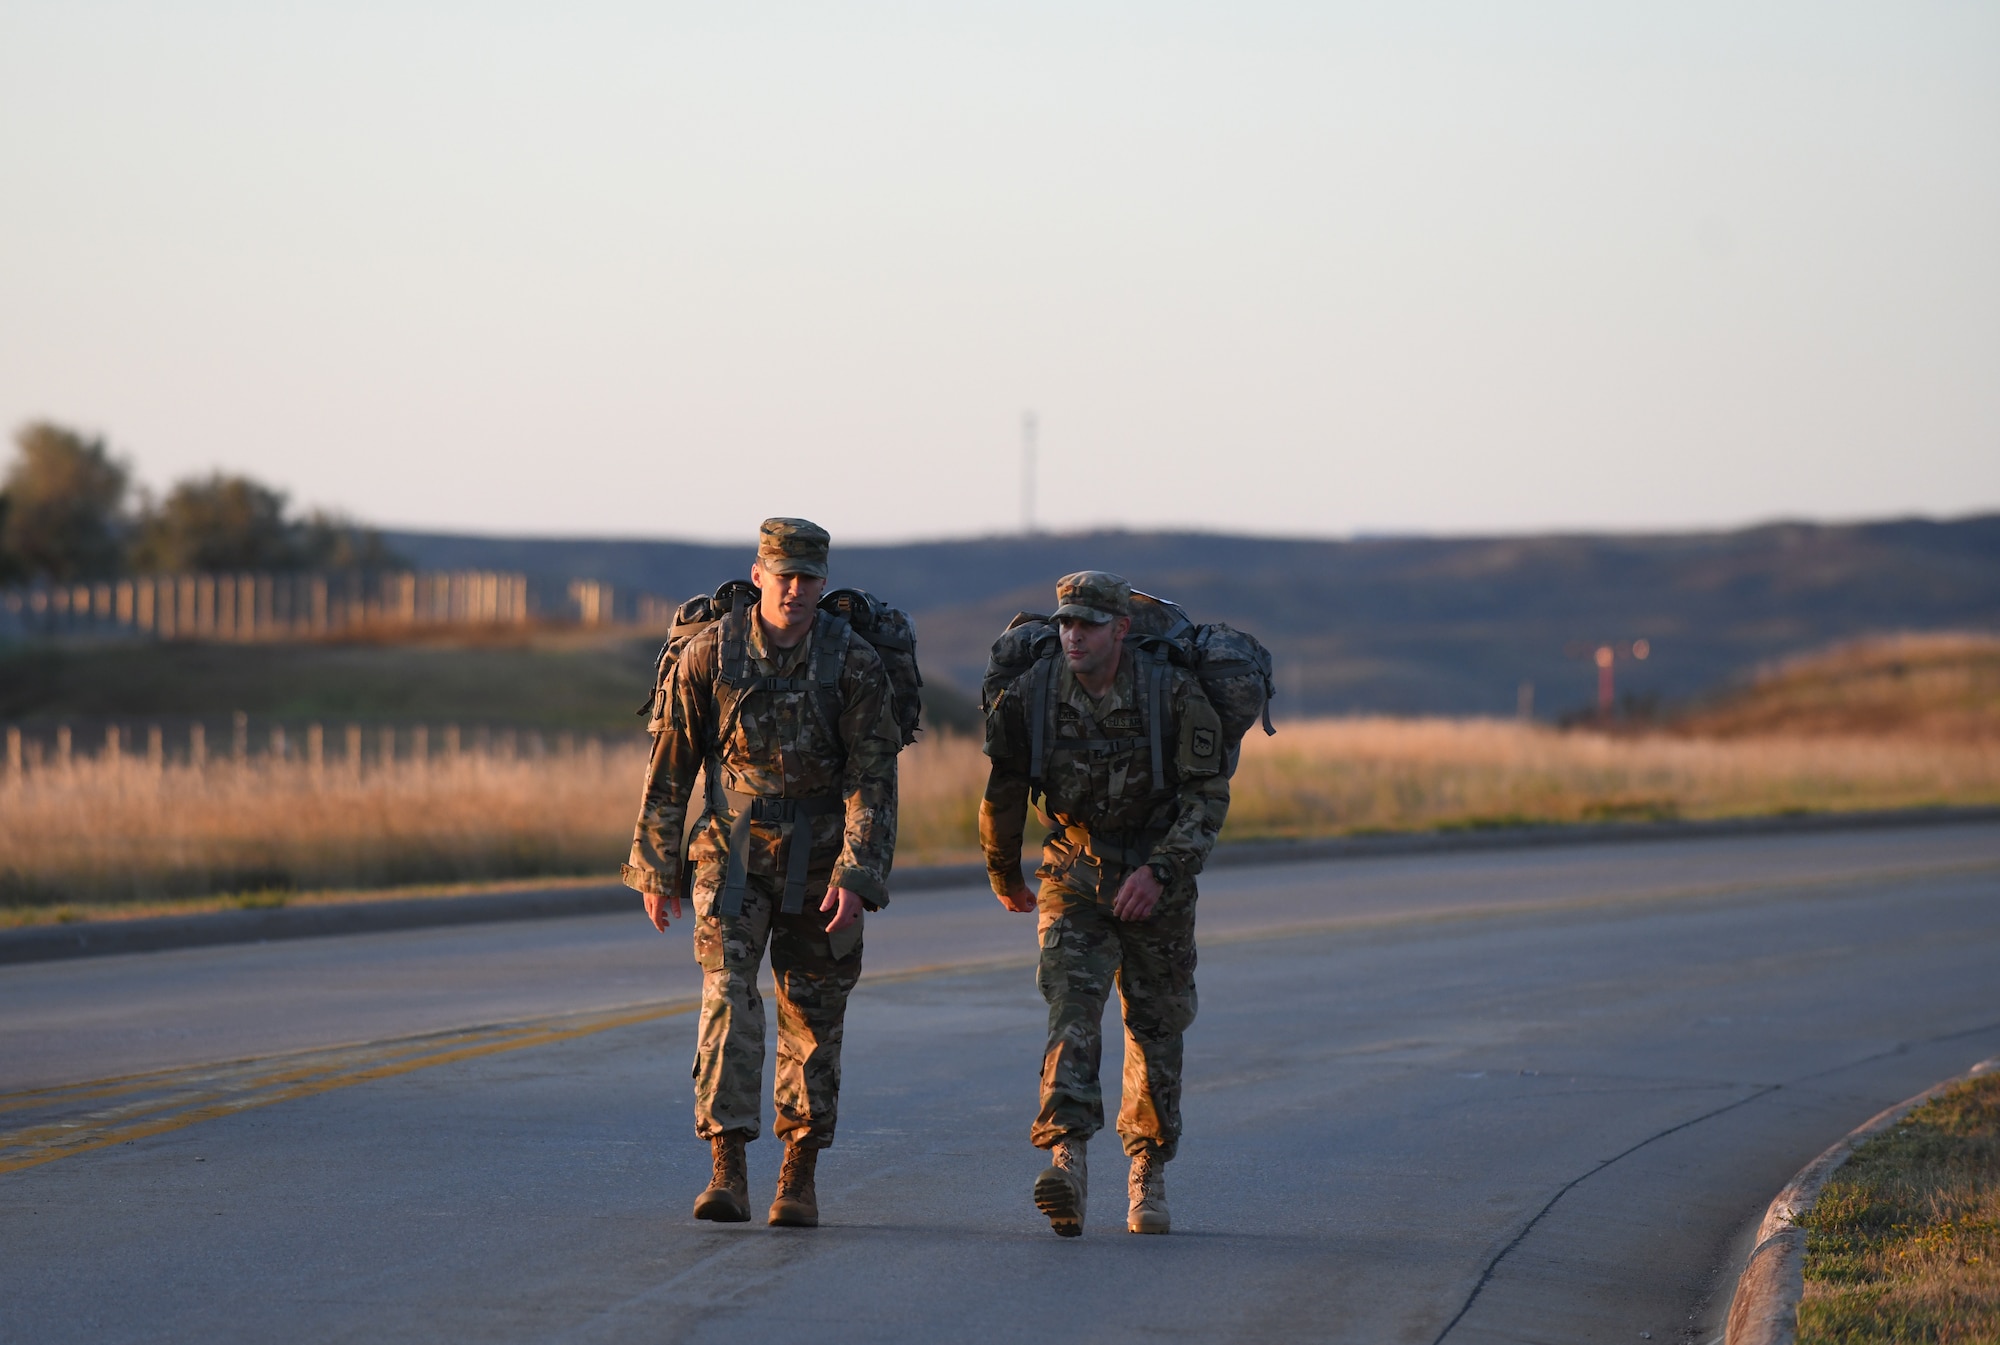 Airmen take part in a 7.46 mile ruck march on Ellsworth Air Force Base, S.D., Sept. 21, 2019. Eleven Ellsworth Airmen participated in the German Armed Forces Proficiency test alongside Army ROTC cadets and South Dakota Army National Guardsmen. Participants had to complete six events in order to qualify for the coveted German Armed Forces Proficiency Badge. (U.S. Air Force photo by Airman 1st Class Christina Bennett)